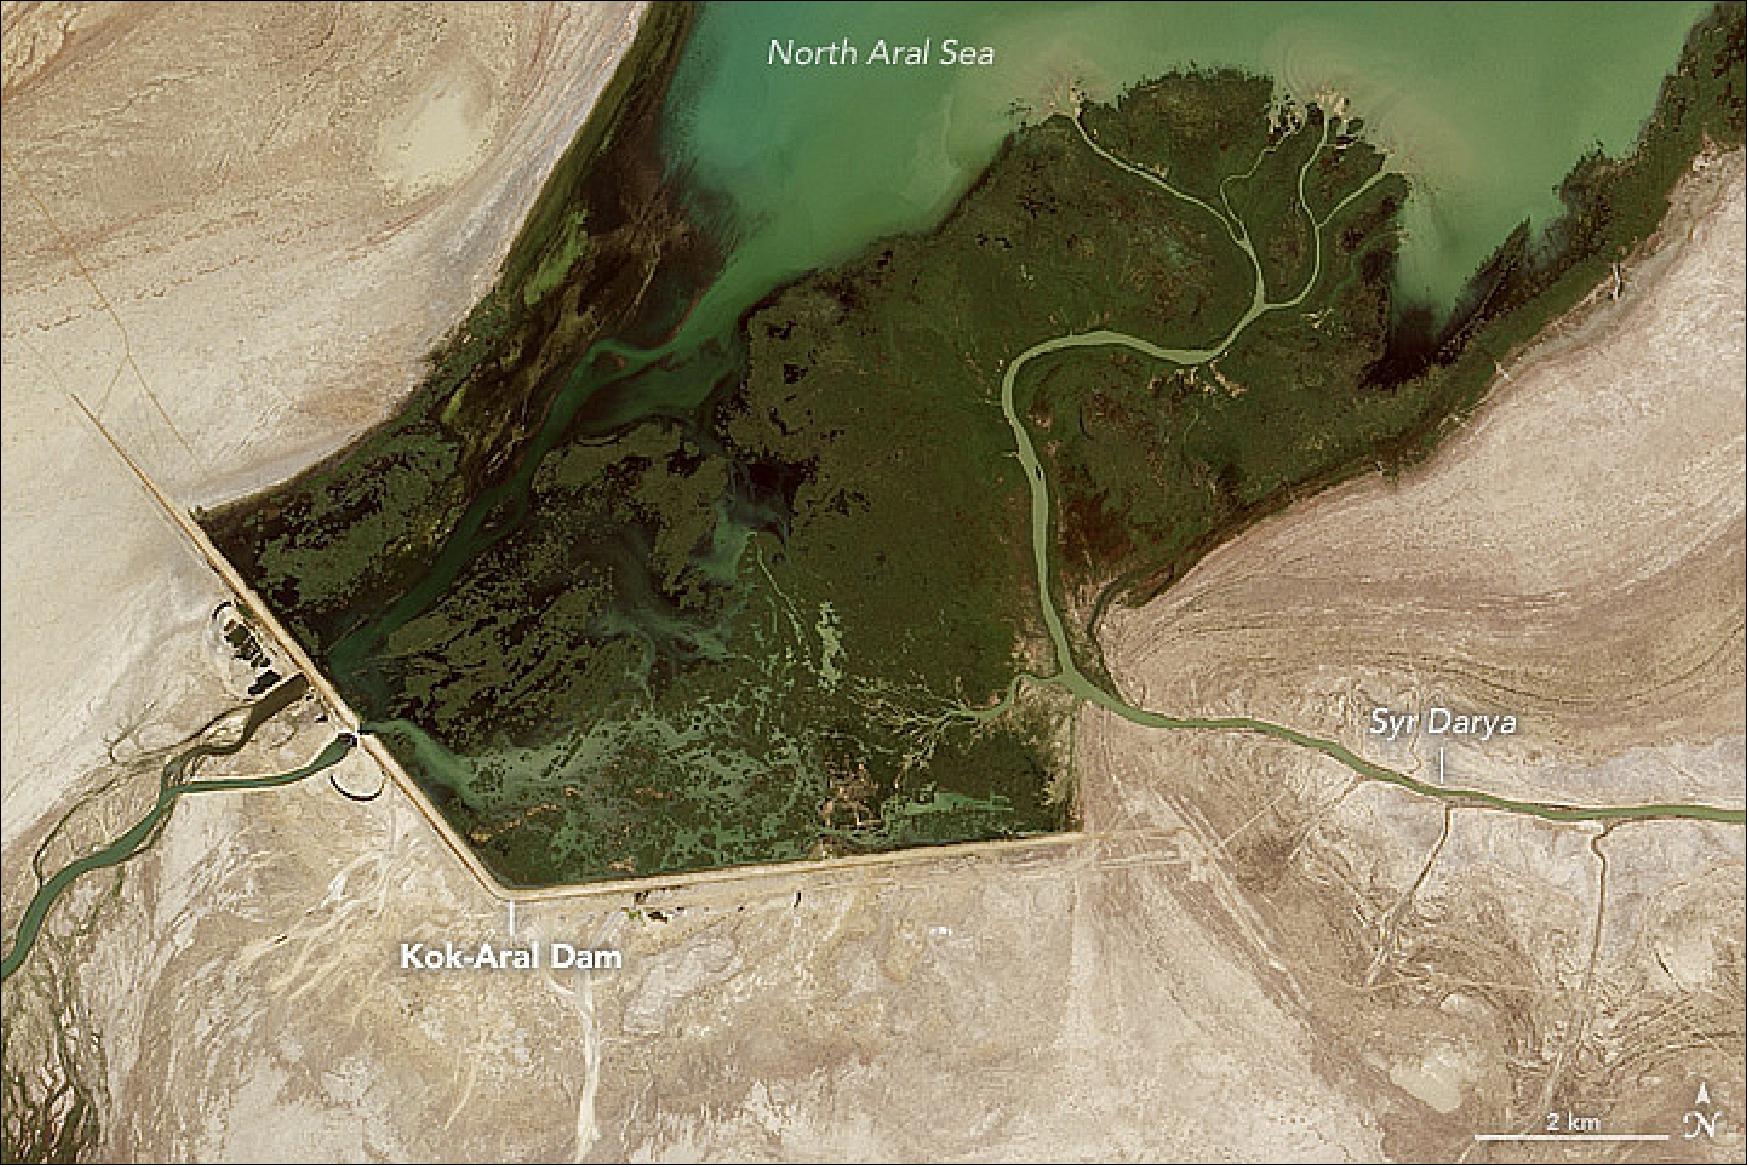 Figure 62: A further detail image of the North Aral Sea was acquired on Aug. 5, 2017 with OLI on Landsat-8. At the time, the sluice gates at the Kok-Aral Dam appeared to be open, and water was flowing past the Tsche-Bas Gulf and into the South Aral Sea ( (image credit: NASA Earth Observatory image by Jesse Allen,using Landsat-8 data from the USGS, Story by Adam Voiland)